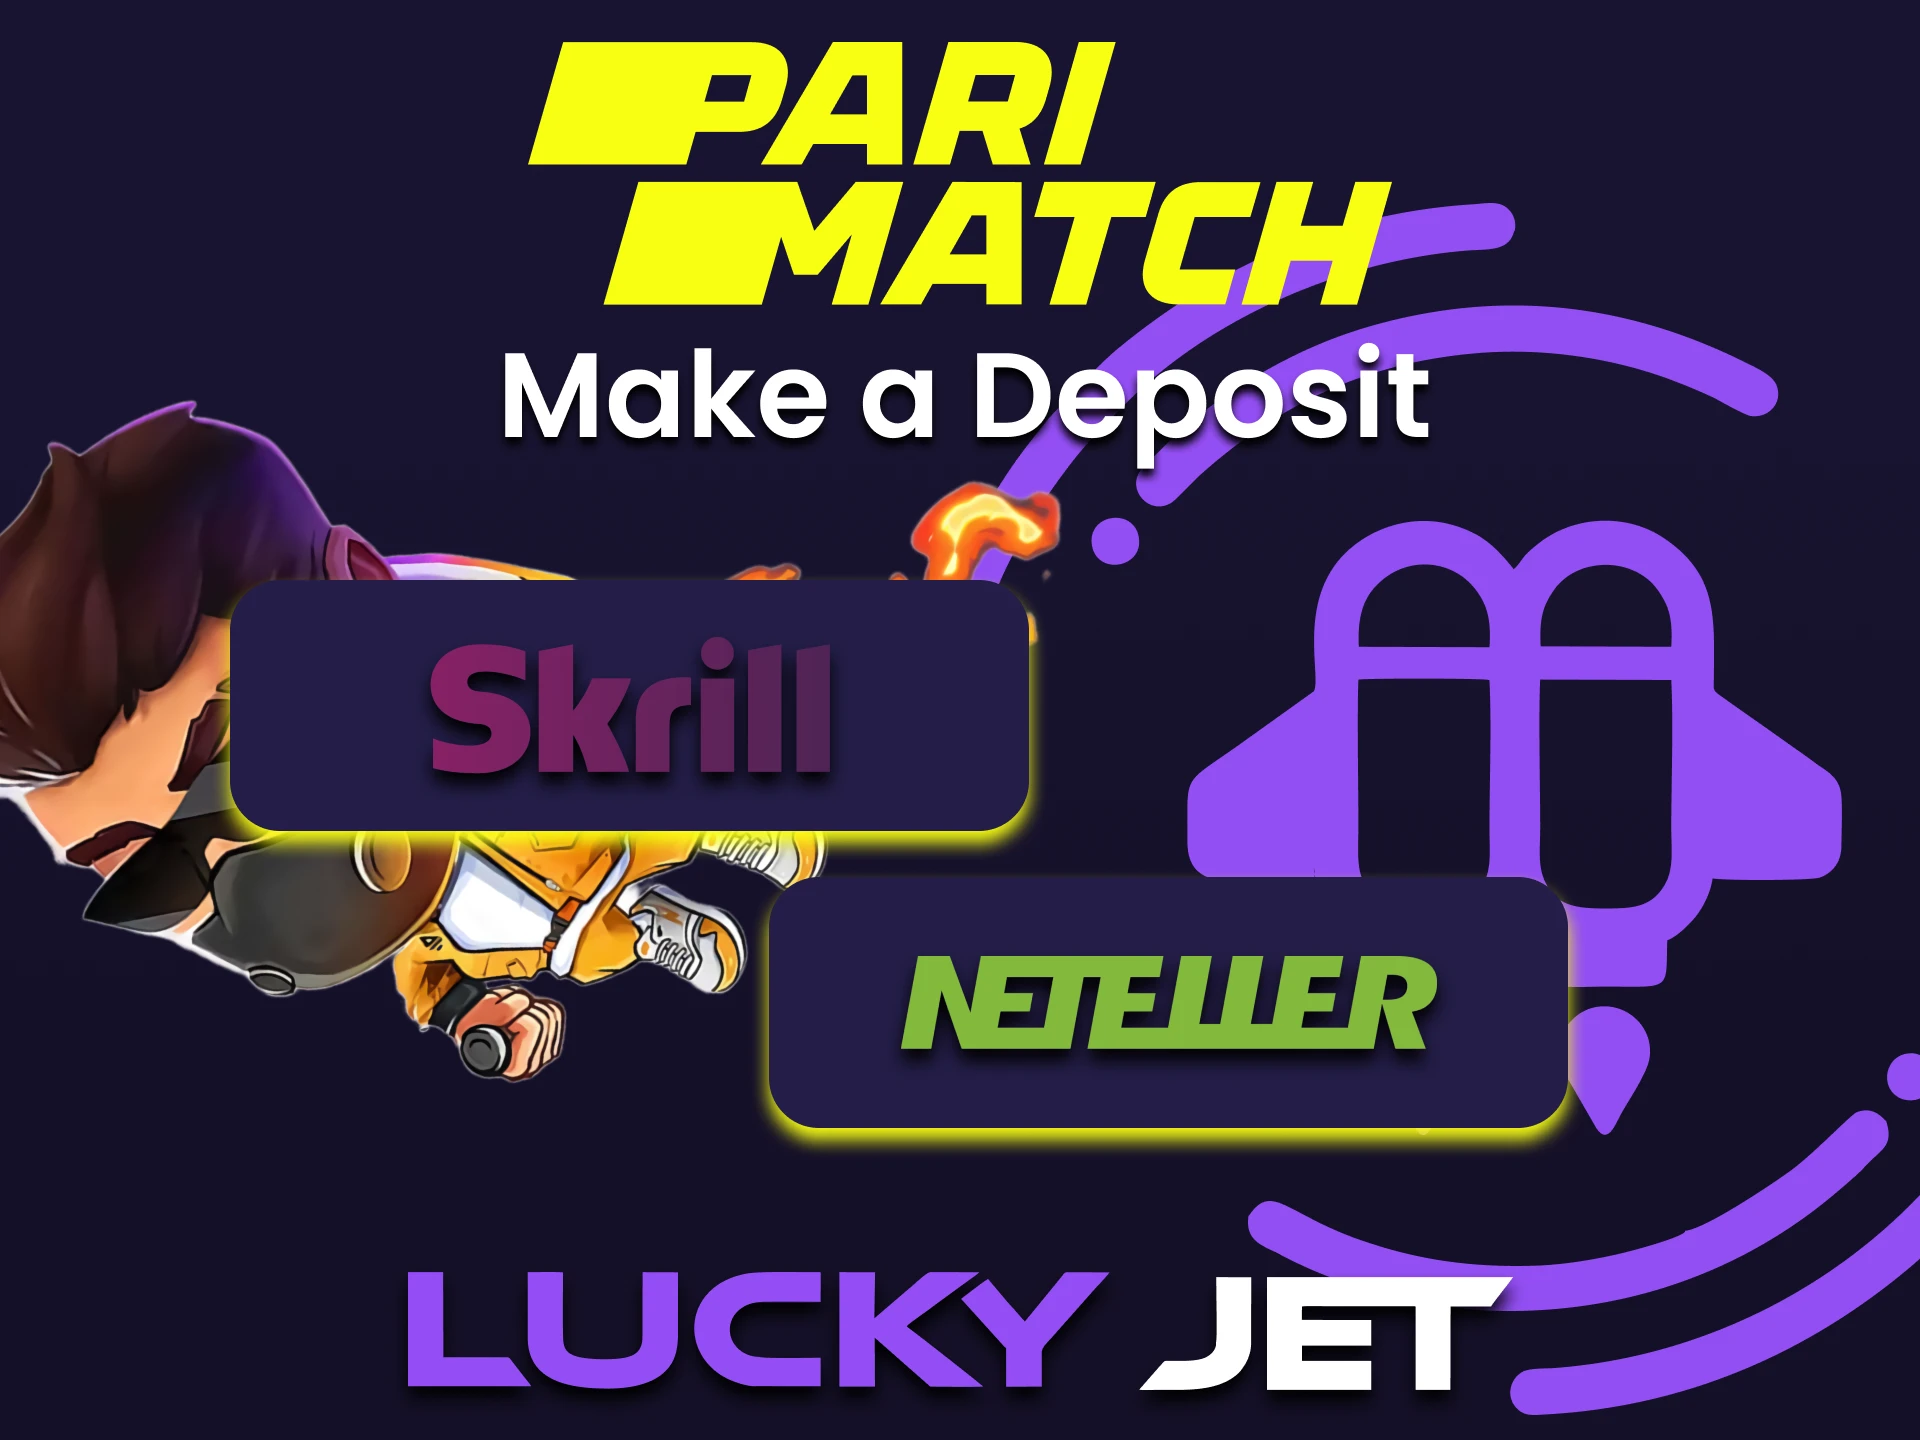 Top up your account to play Lucky Jet from Parimatch.